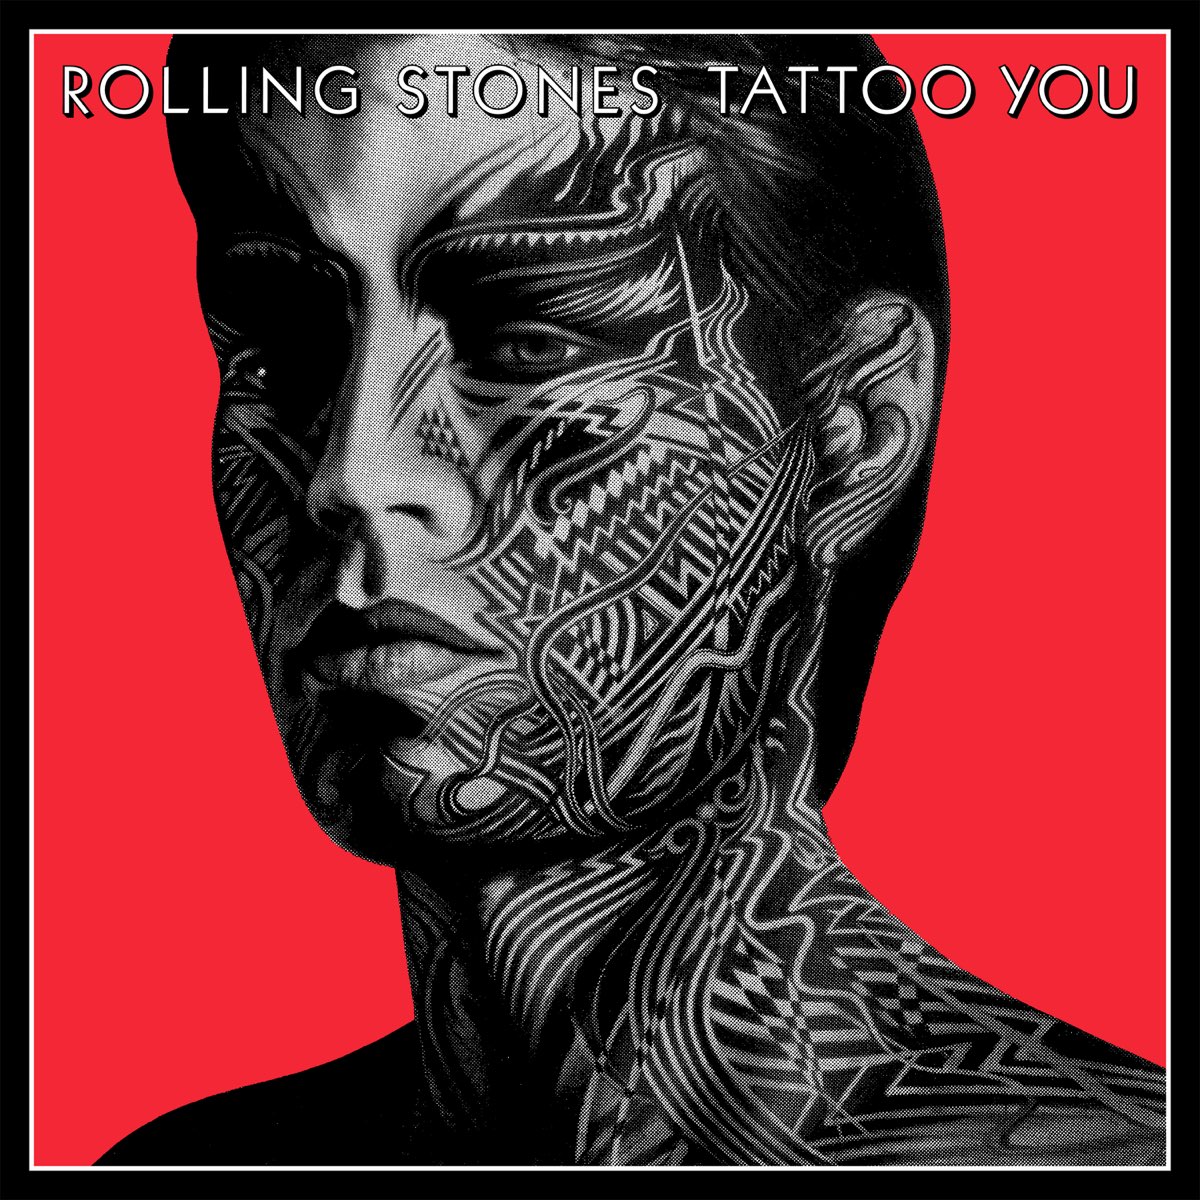 Tattoo You (2021 Remaster) của The Rolling Stones trên Apple Music